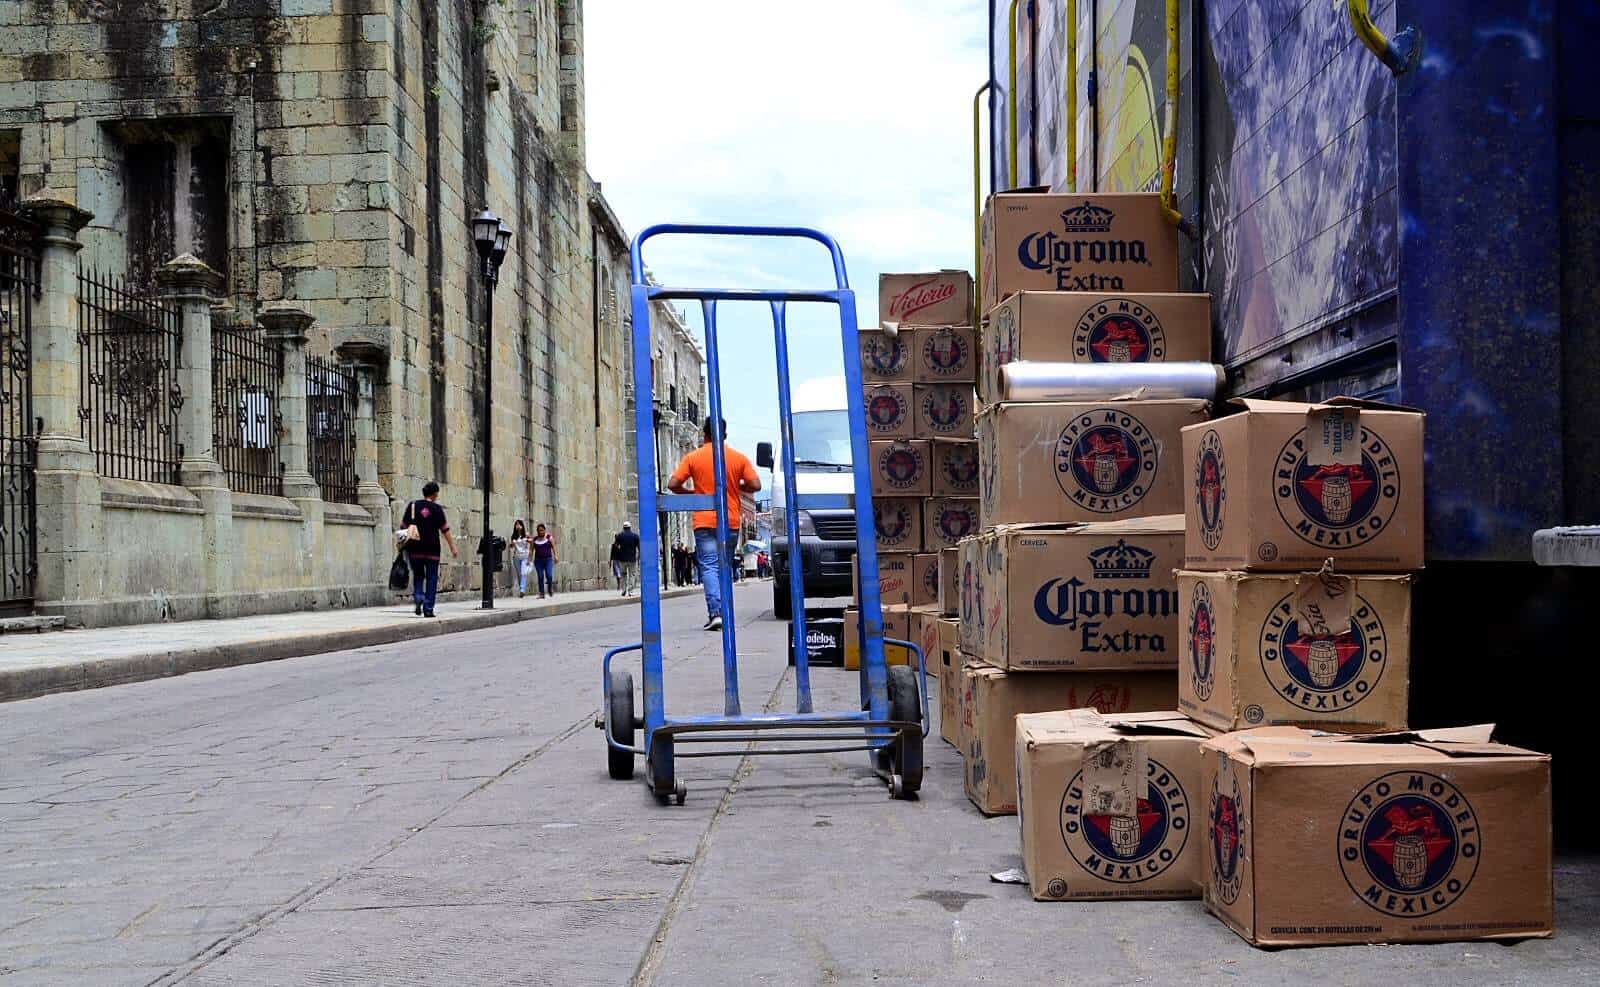 Boxes of Corona stacked up next to dolly